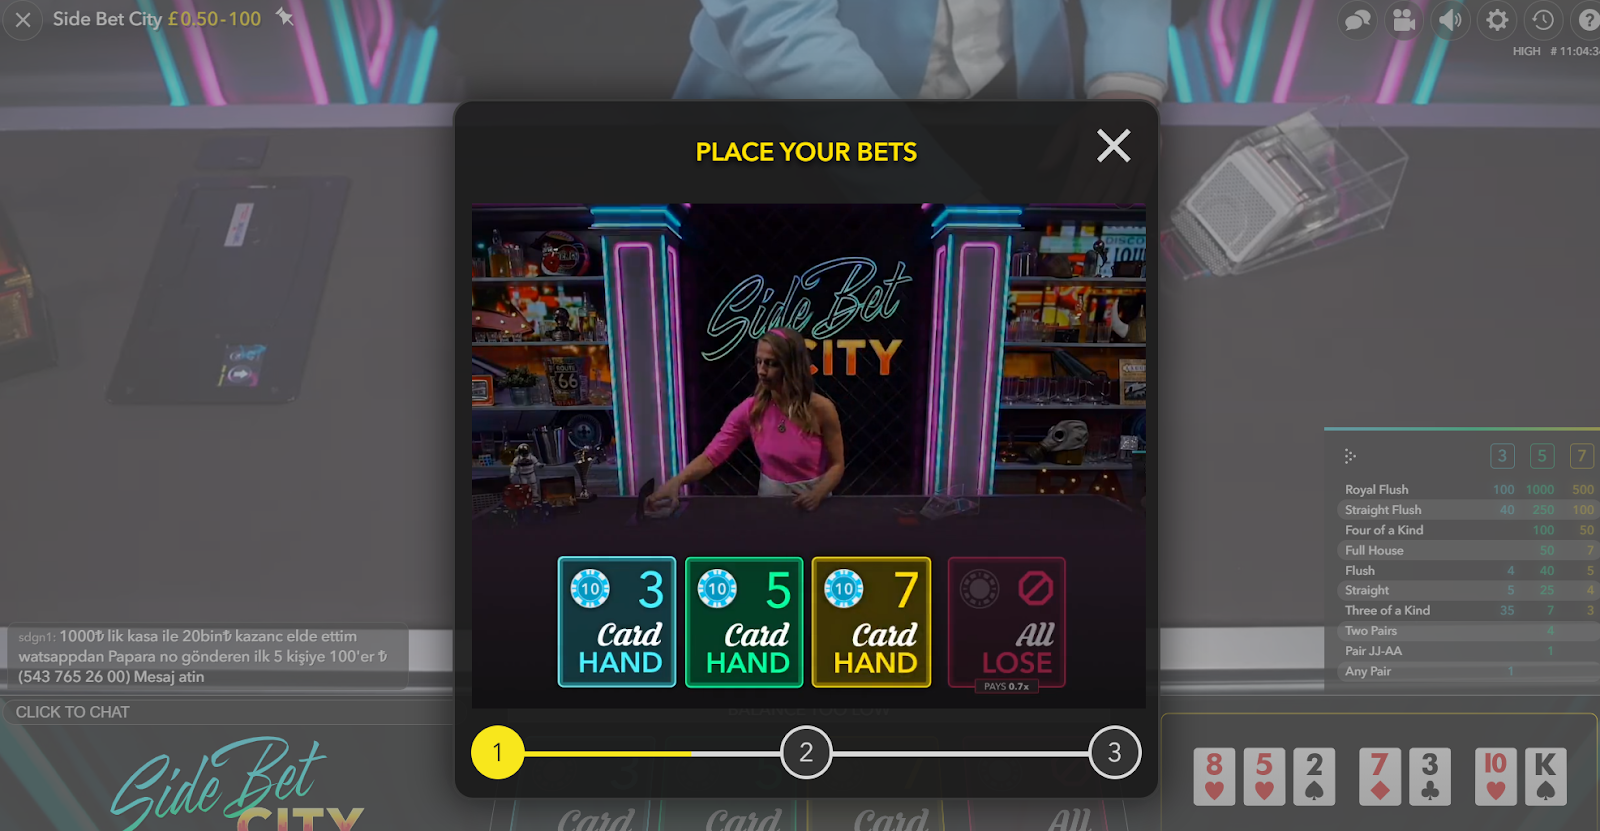 Side Bet City is one of the many great poker games you can play at Casino Gods